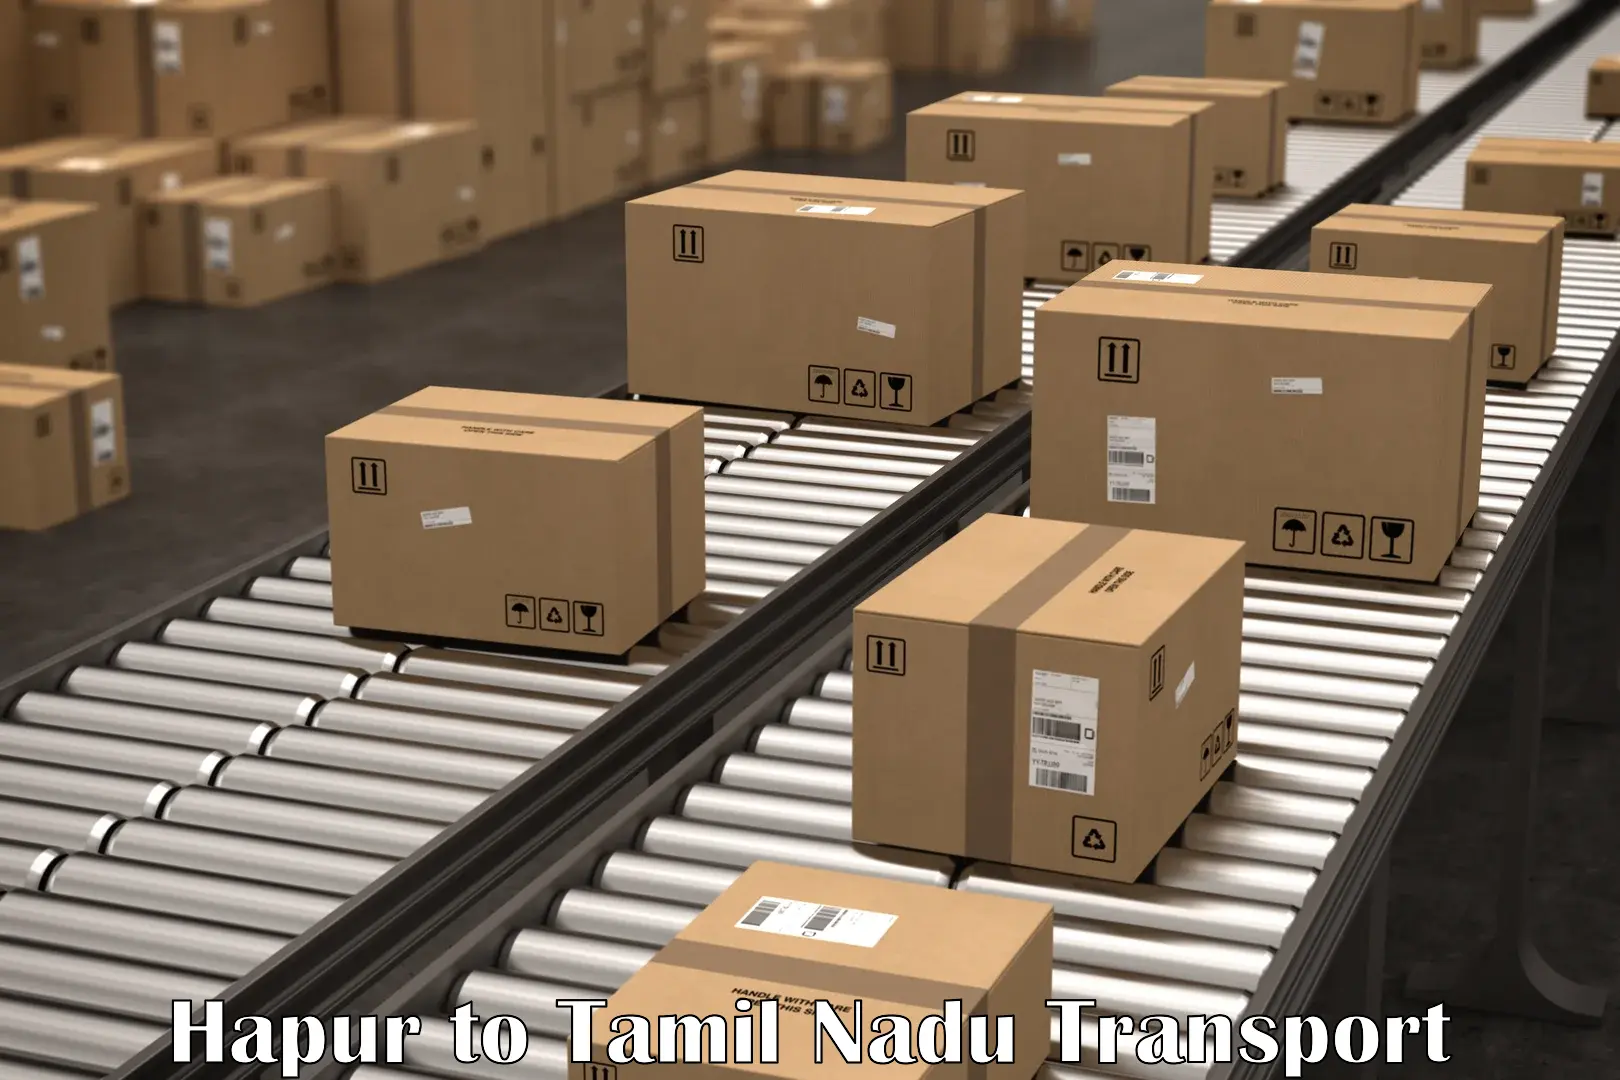 Road transport online services Hapur to Chennai